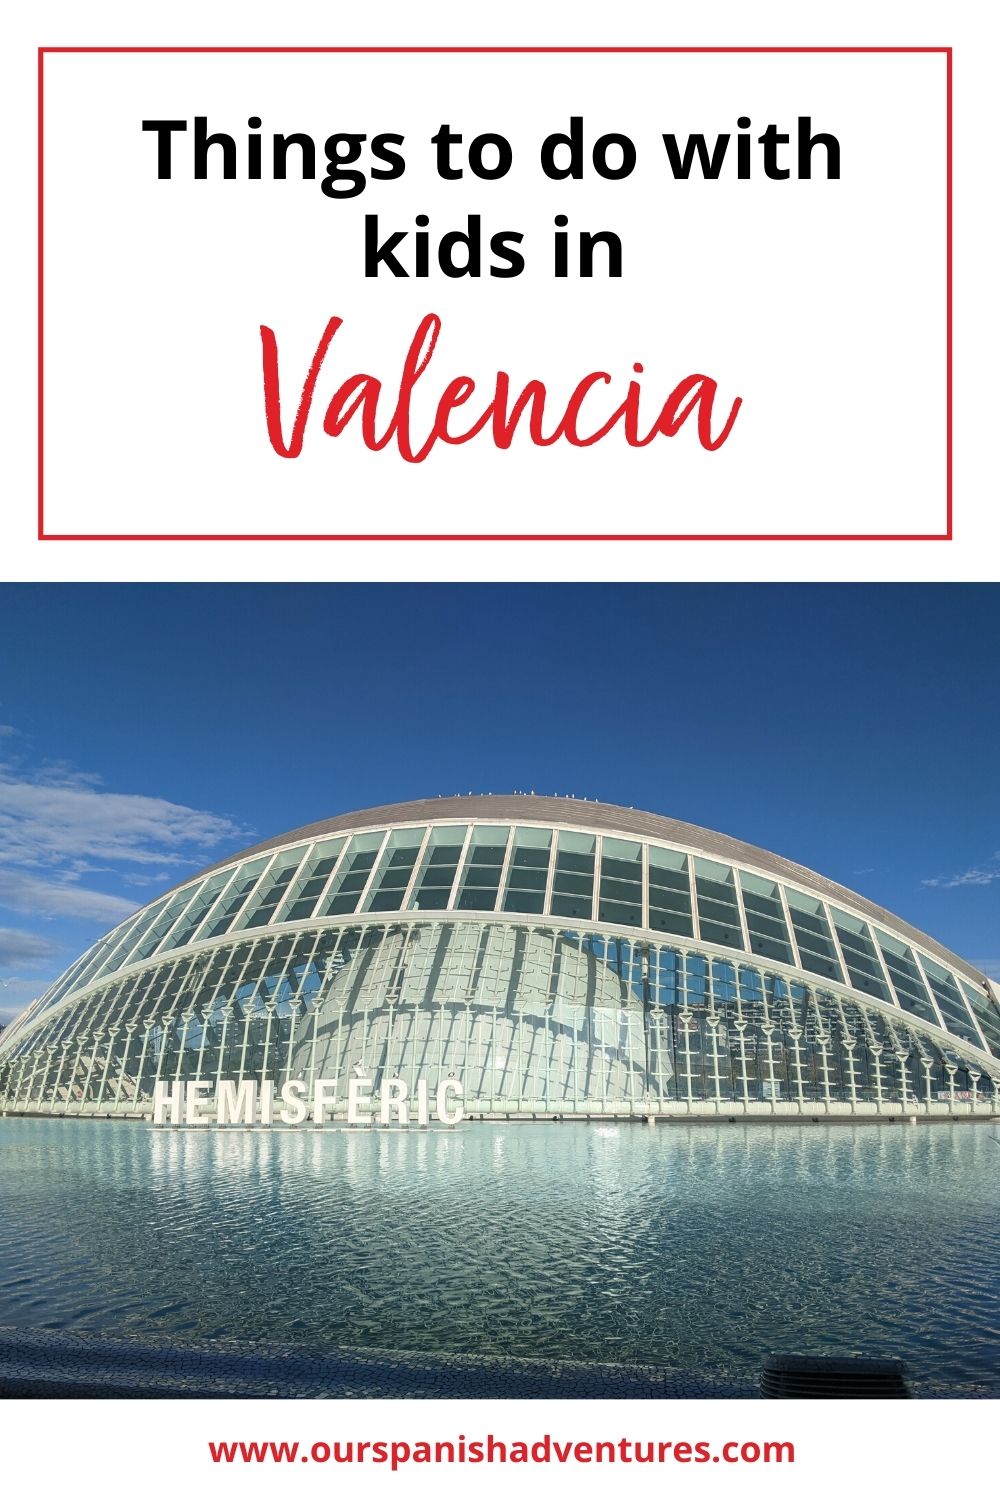 Things to do with kids in Valencia | Our Spanish Adventures